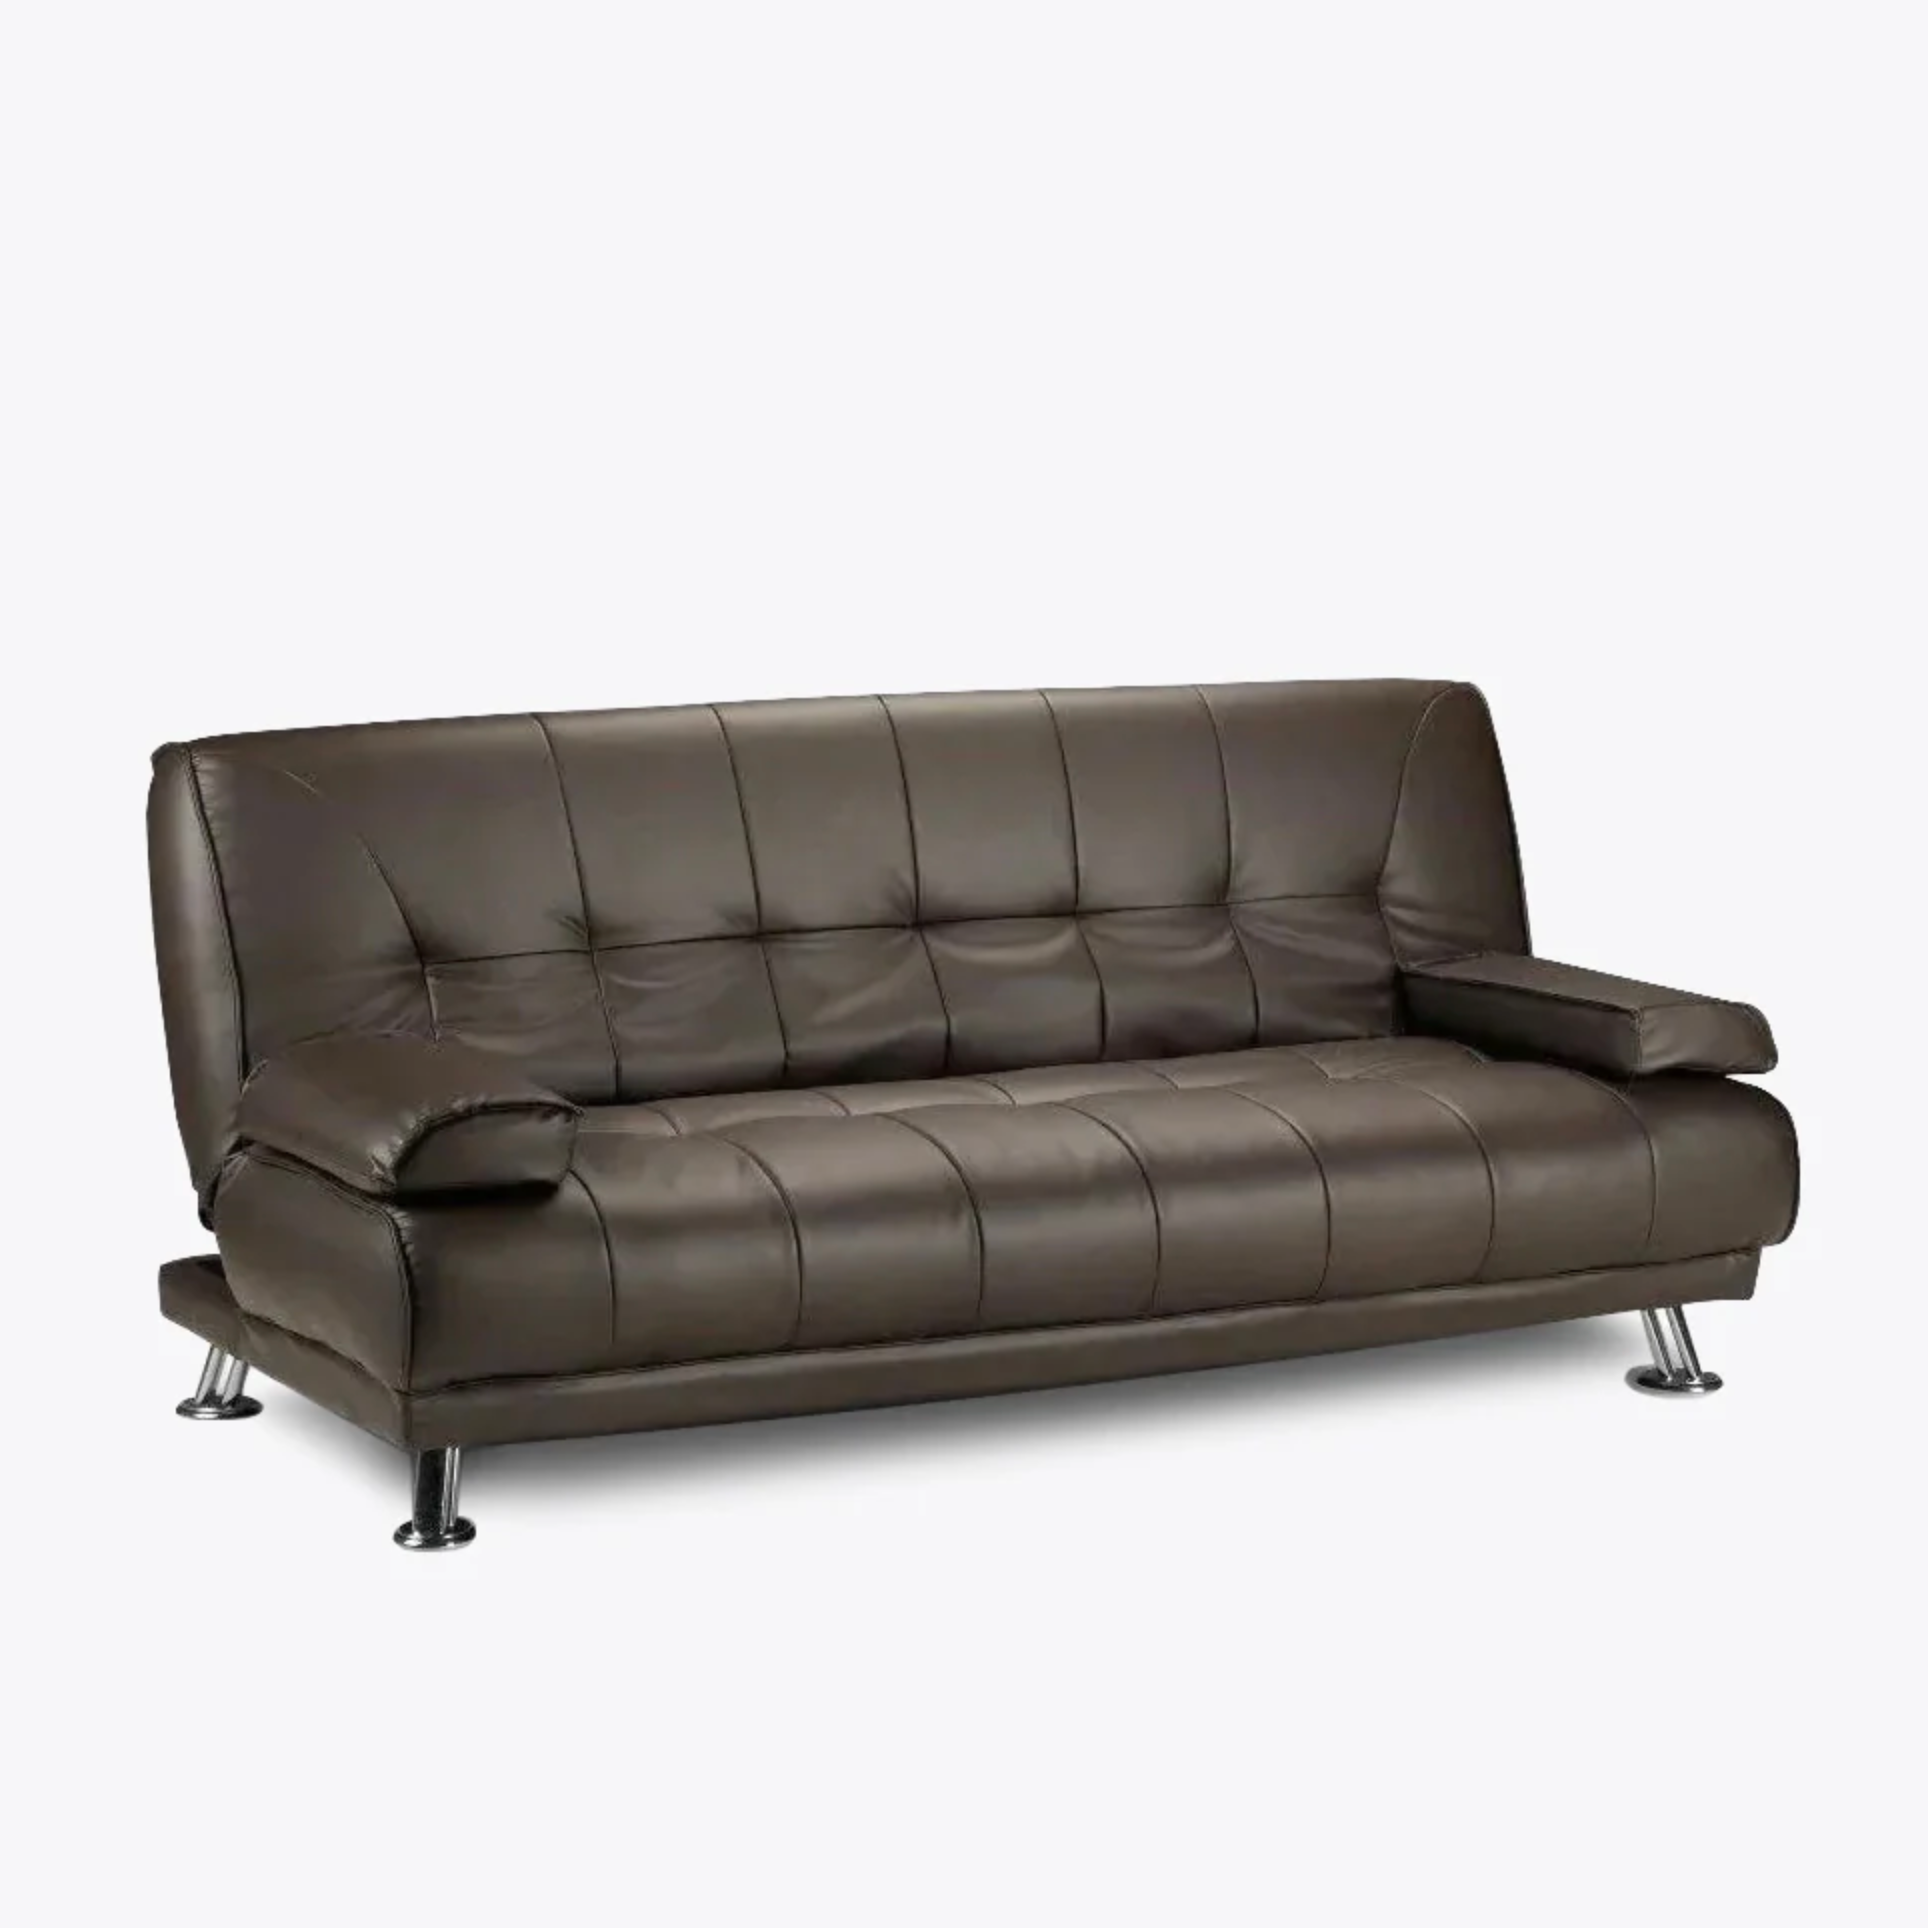 Nicole Leather Sofa Bed Brown Leather